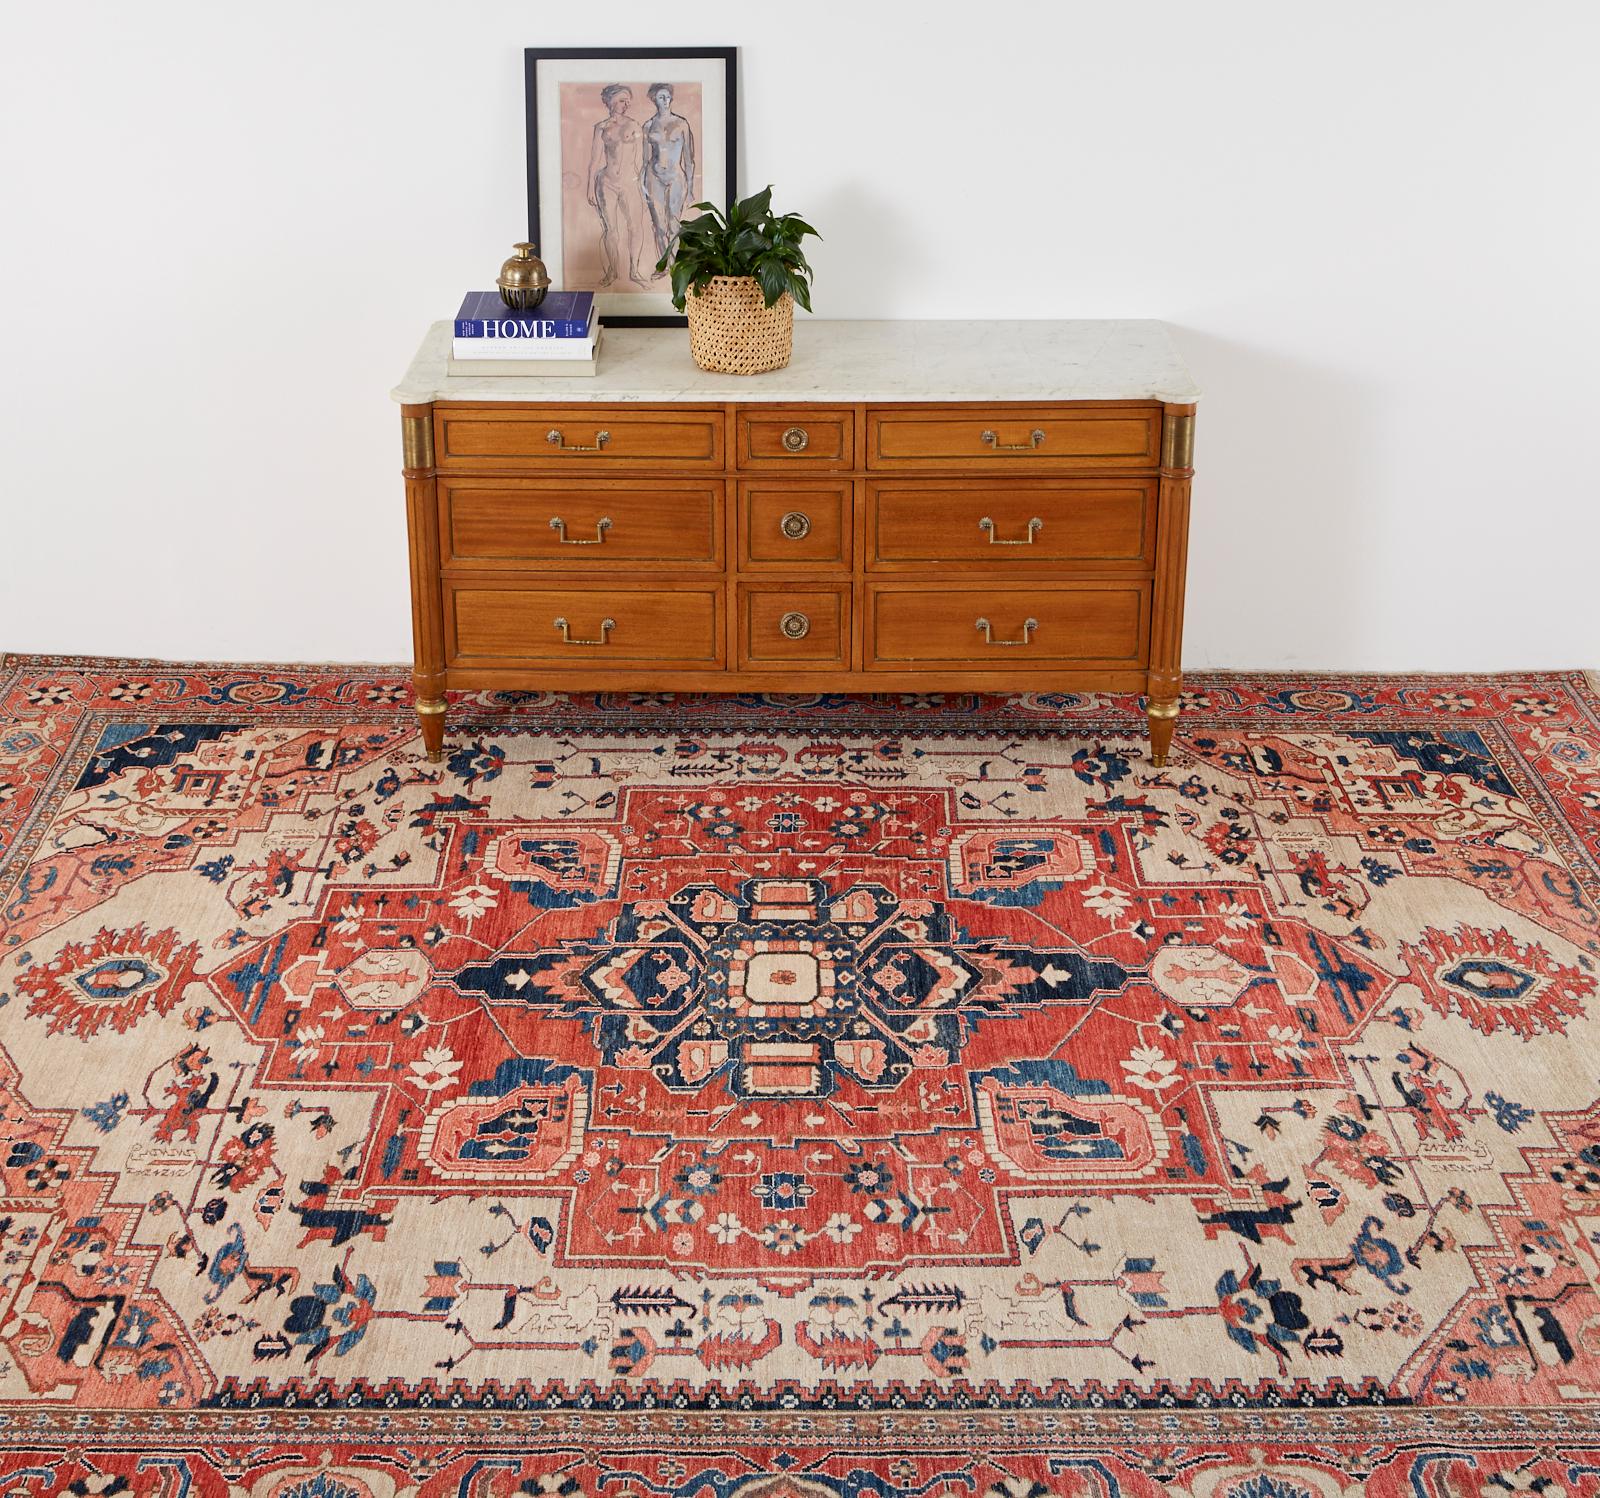 Exceptional 21st century Persian Heriz style Azeri carpet. Stylized floral geometric patterns over a light beige field. Lovely vivid indigo blue and pink accents decorate the field. Made of hand knotted wool from an estate in San Francisco, CA.